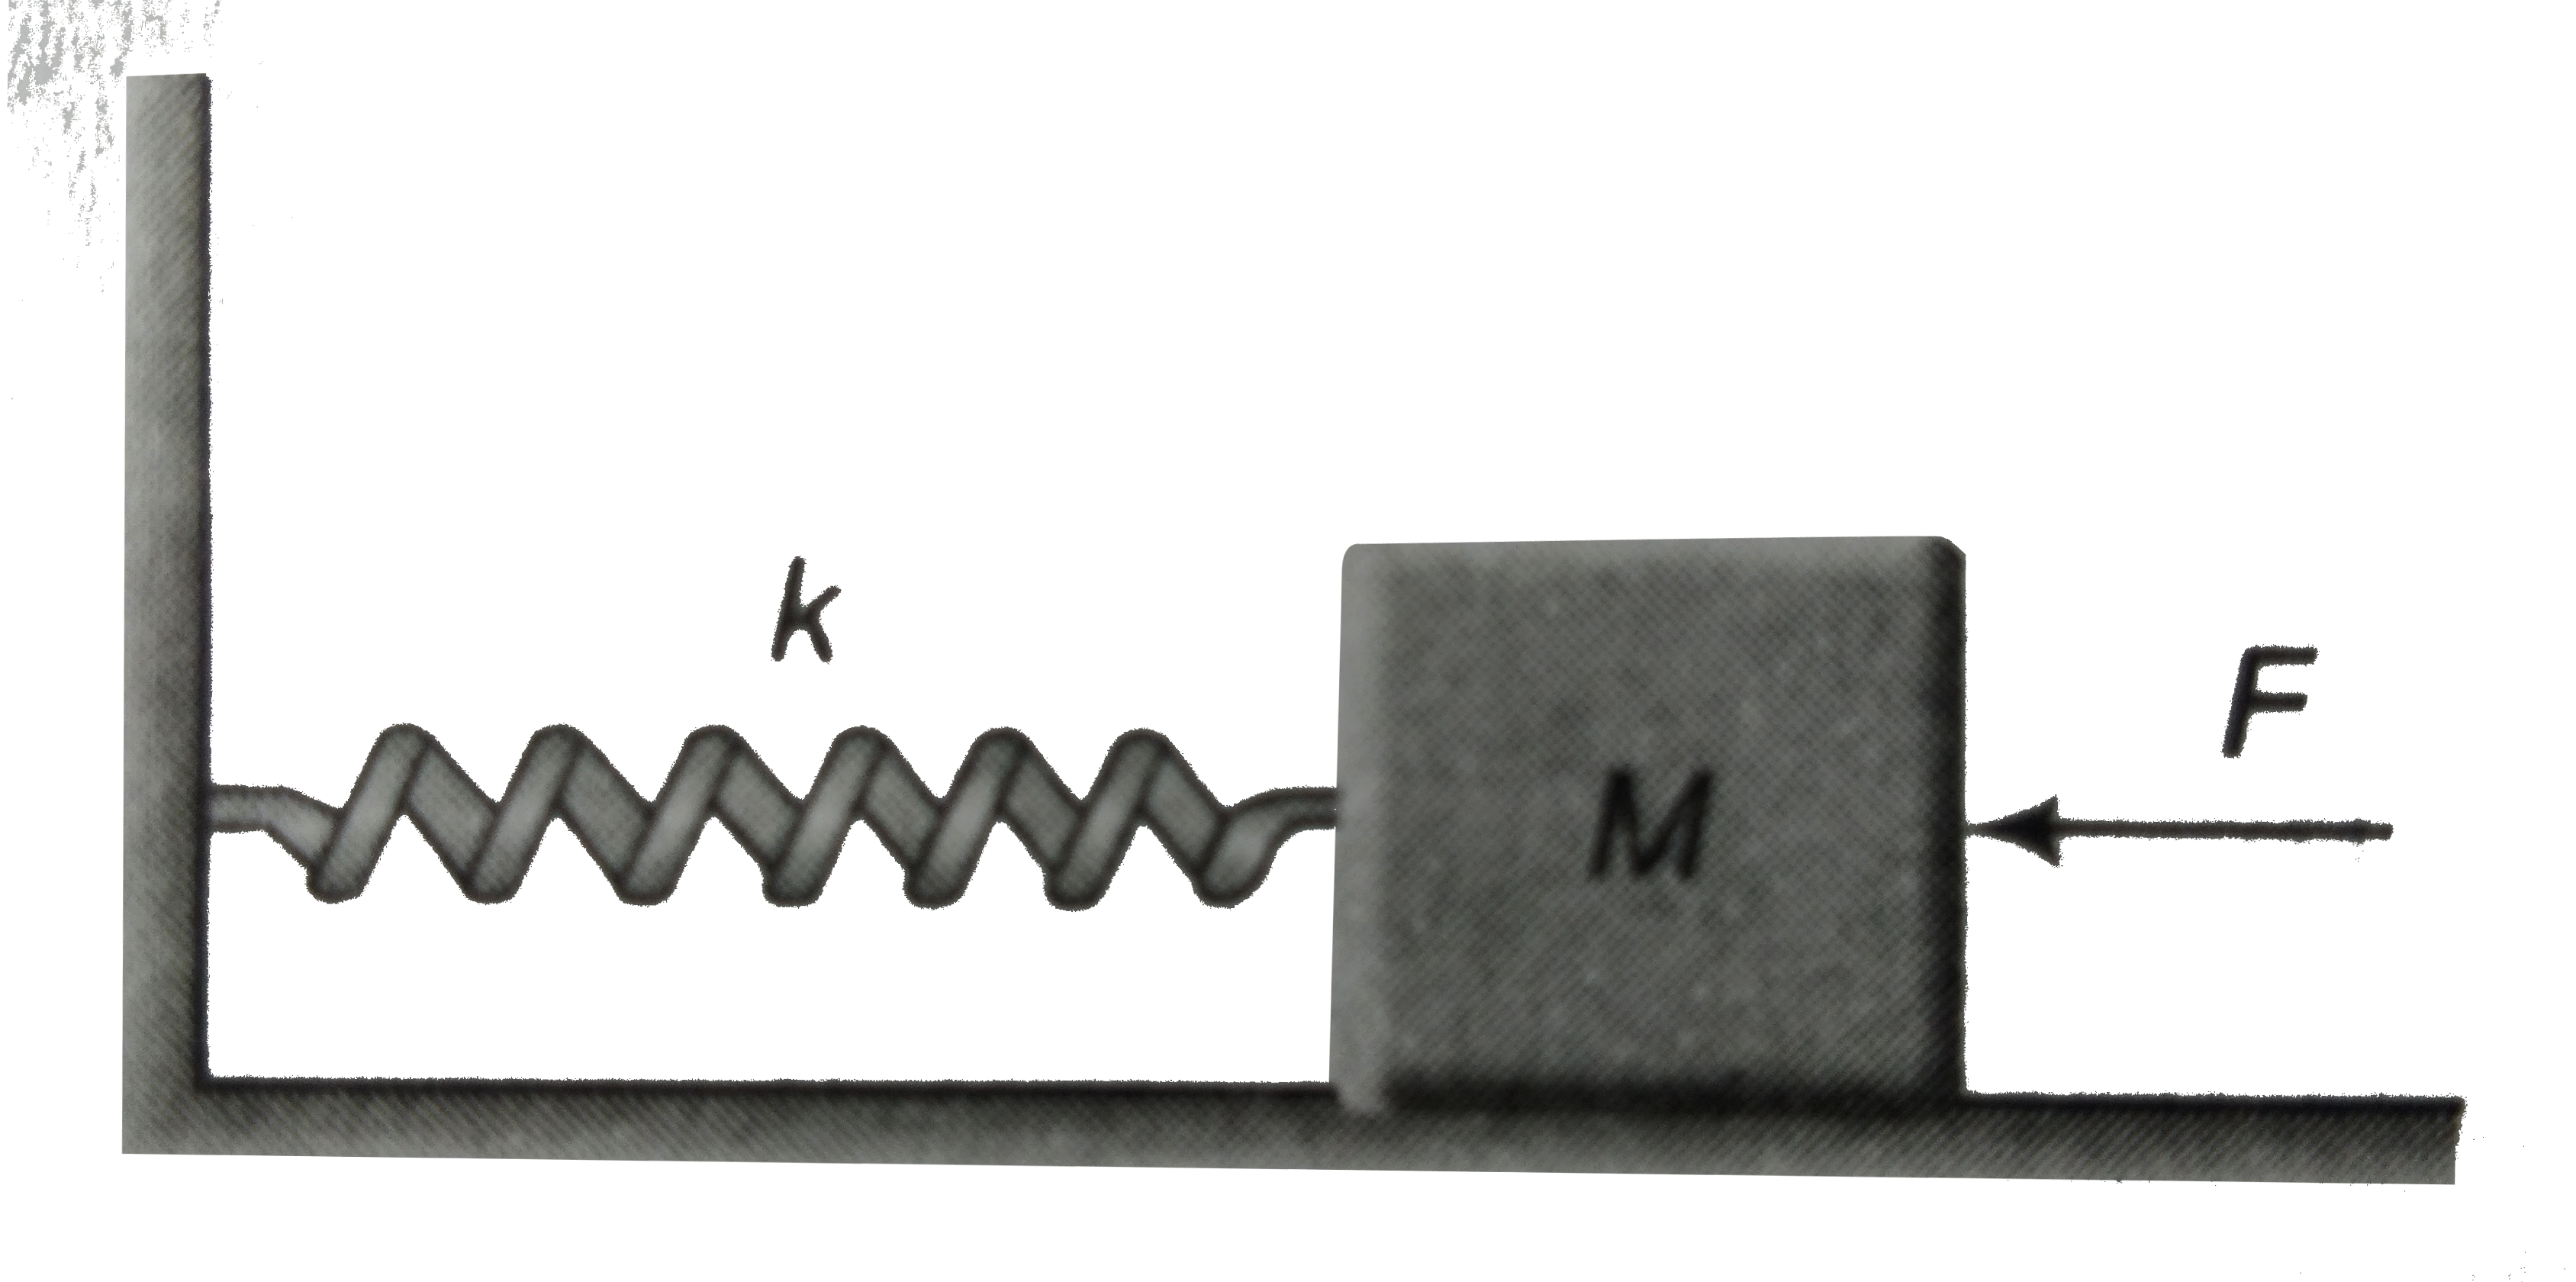 In figure, k = 100 N//m, M = 1kg and F = 10 N      (a) Find the compression of the spring in the equilibrium position    (b) A sharp blow by some external agent imparts a speed of 2 m//s to the block towards left. Find the sum of the potential energy of the spring and the kinetic energy of the block at this instant.    (c) Find the time period of the resulting simple harmonic motion.   (d) Find the amplitude.